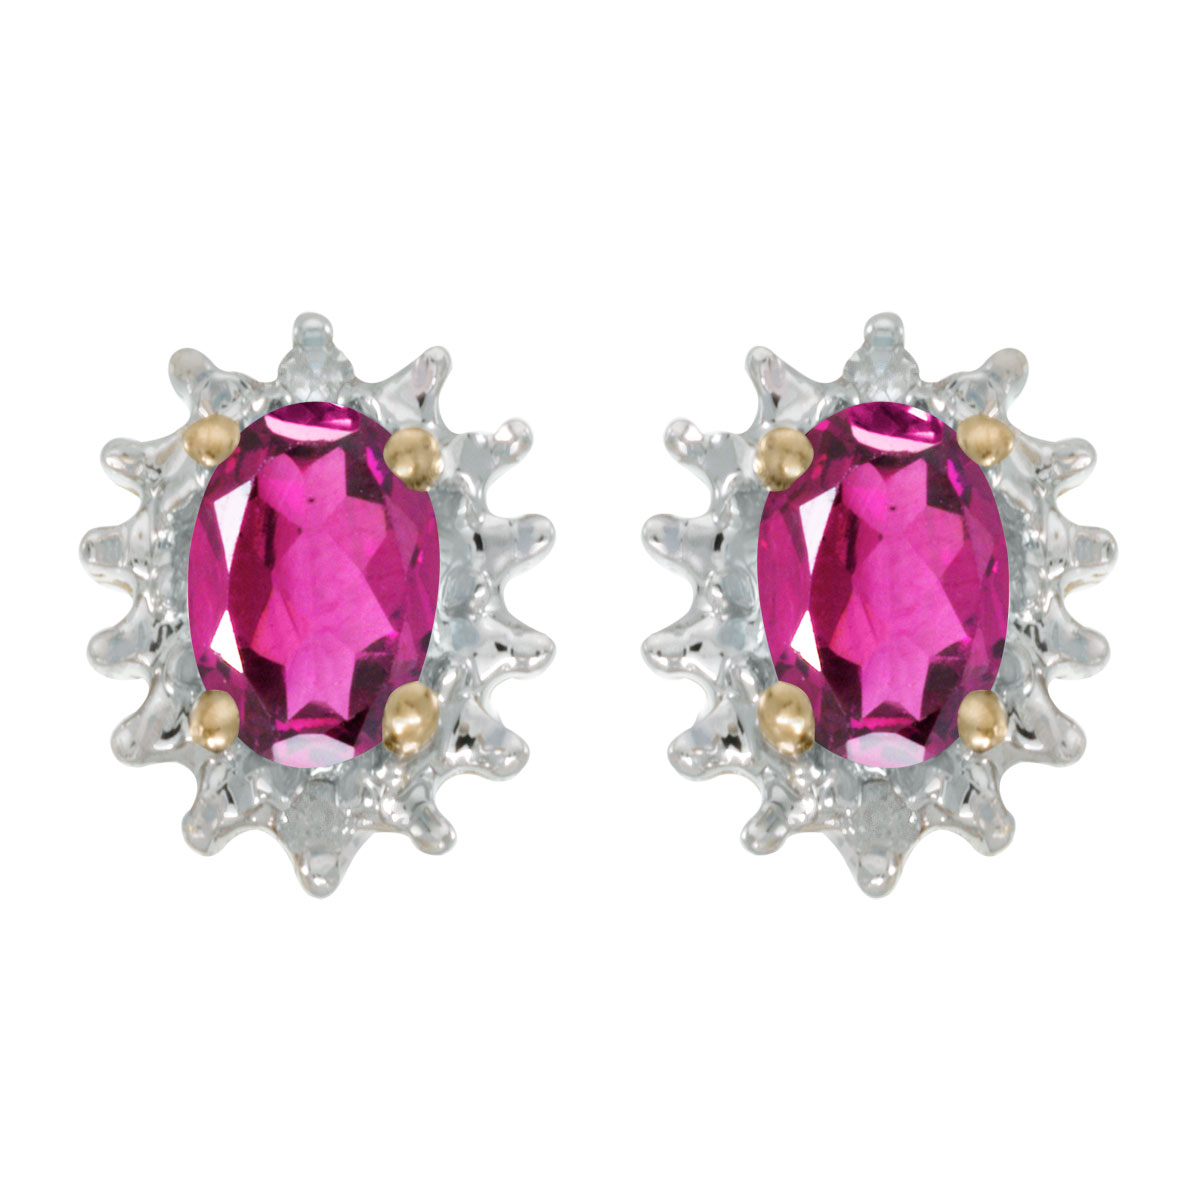 JCX2000: These 14k yellow gold oval pink topaz and diamond earrings feature 6x4 mm genuine natural pink topazs with a 0.86 ct total weight and .04 ct diamonds.